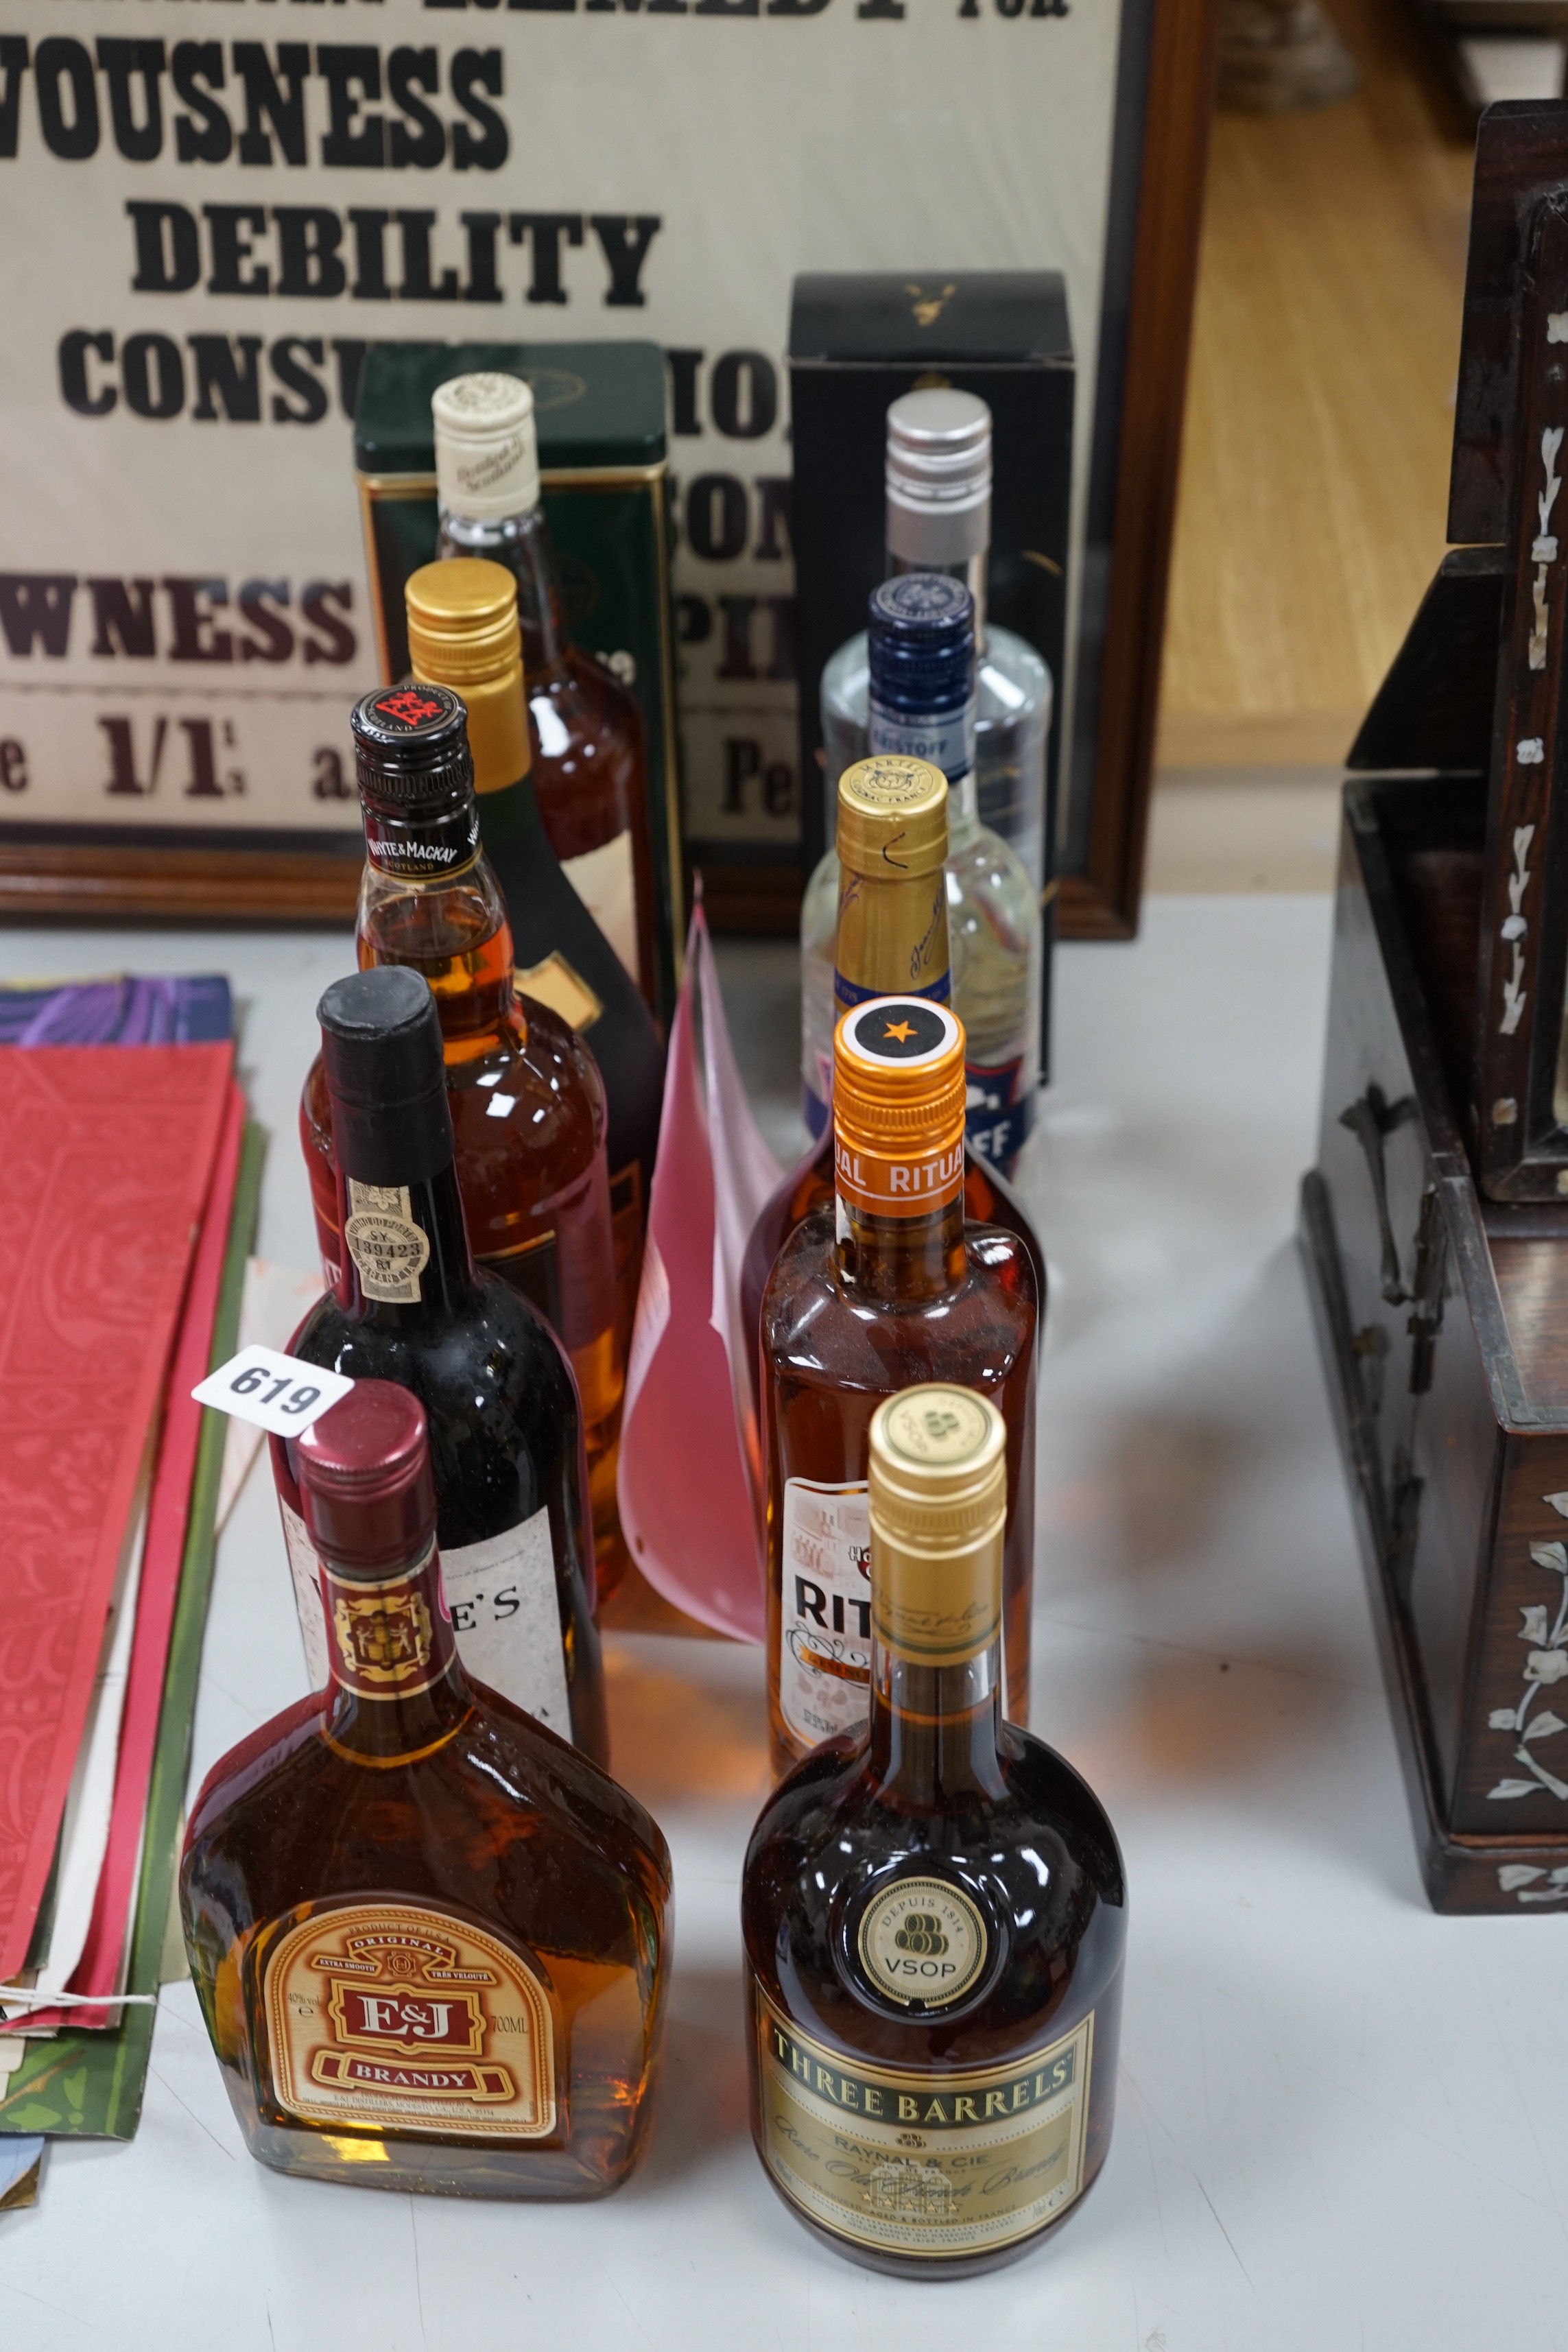 12 bottles of various alcohols to include a litre of Famous Grouse whisky, a litre of Bonaparte brandy, a litre of Whyte and Mackay, a 70cl of Johnnie Walker black label, a bottle of Tullamore Dew Whiskey, a bottle of Er